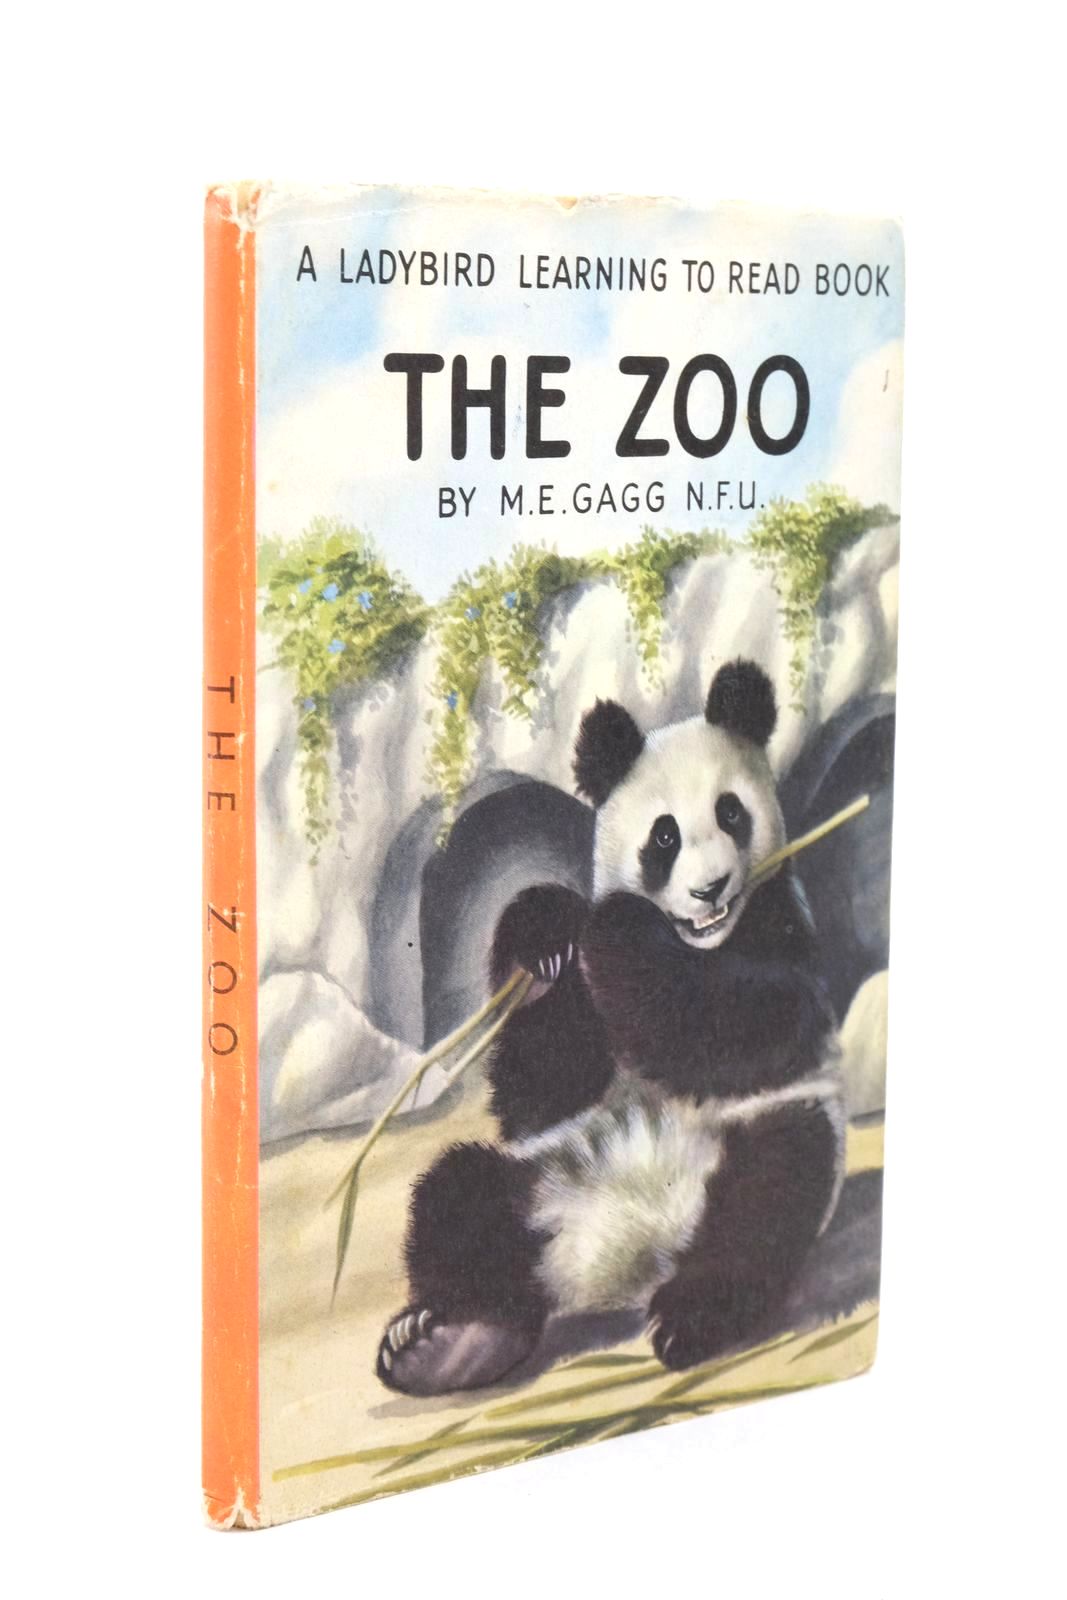 Photo of THE ZOO written by Gagg, M.E. illustrated by Driscoll, Barry published by Wills & Hepworth Ltd. (STOCK CODE: 1322765)  for sale by Stella & Rose's Books